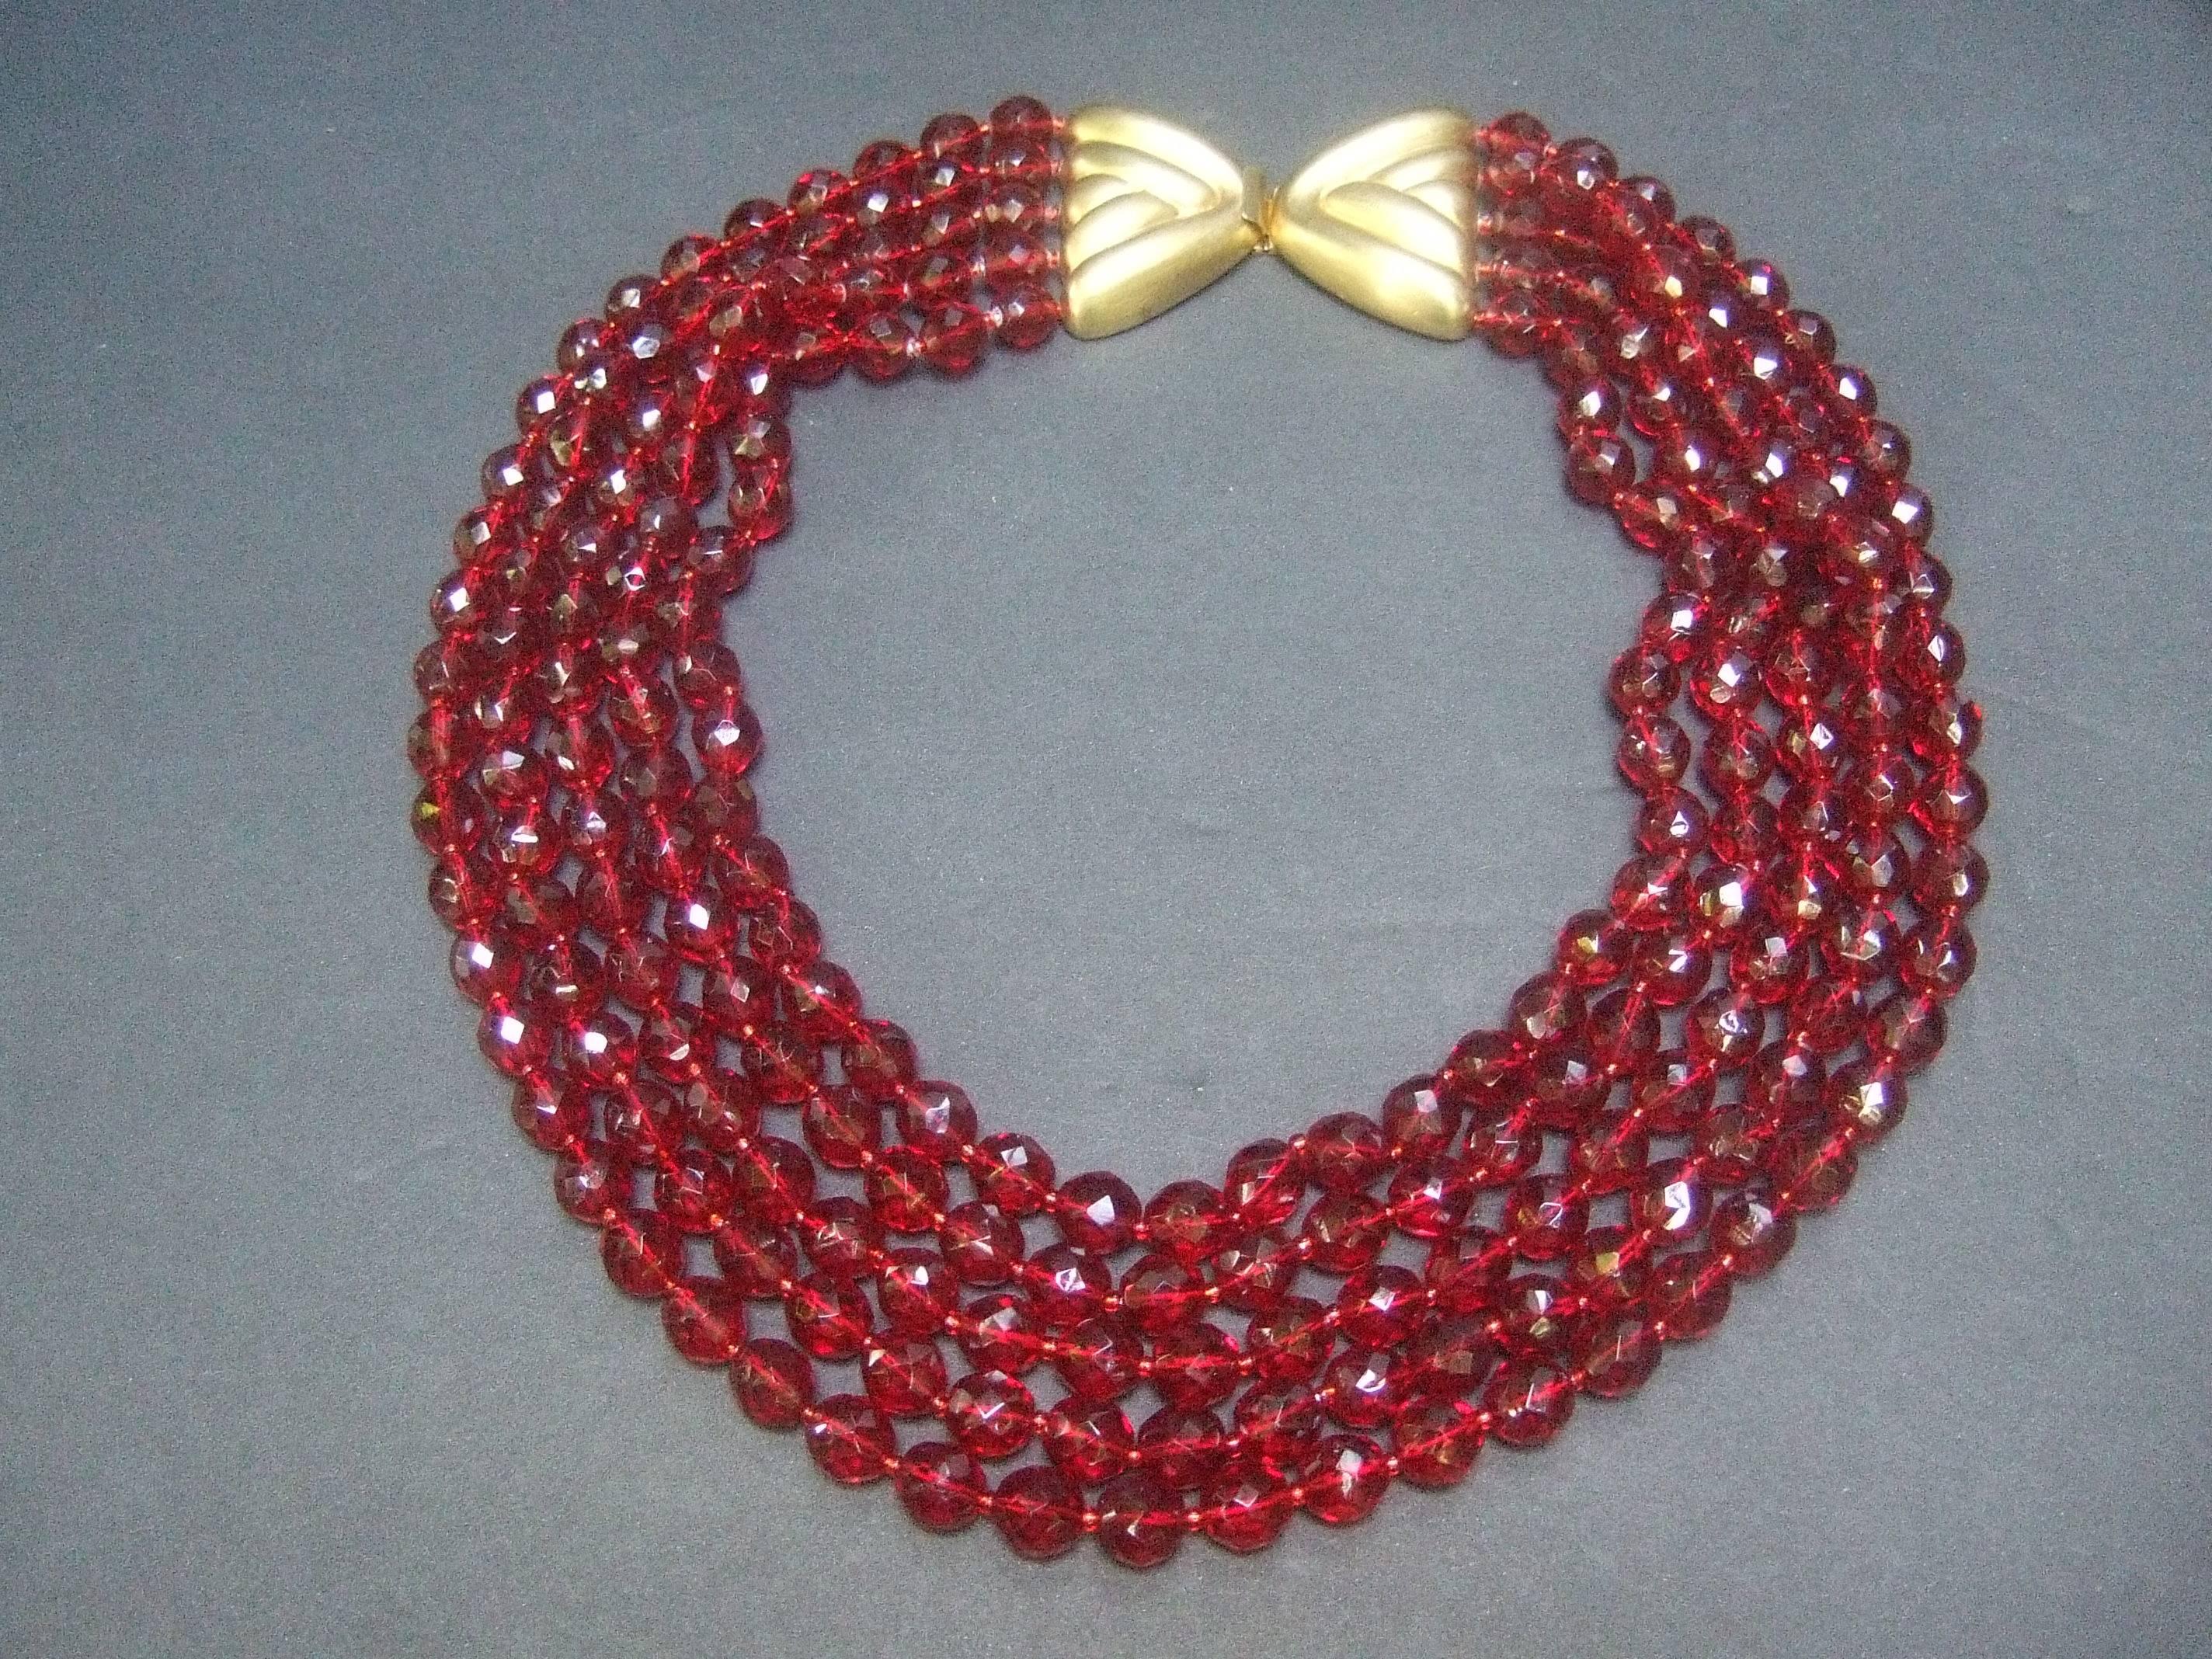 Valentino Exquisite cranberry crystal statement necklace c 1980
The show stopping necklace is designed with five graduated
strands of brilliant deep red glittering crystals 

Makes a very elegant dramatic accessory perfect for the holidays

The five